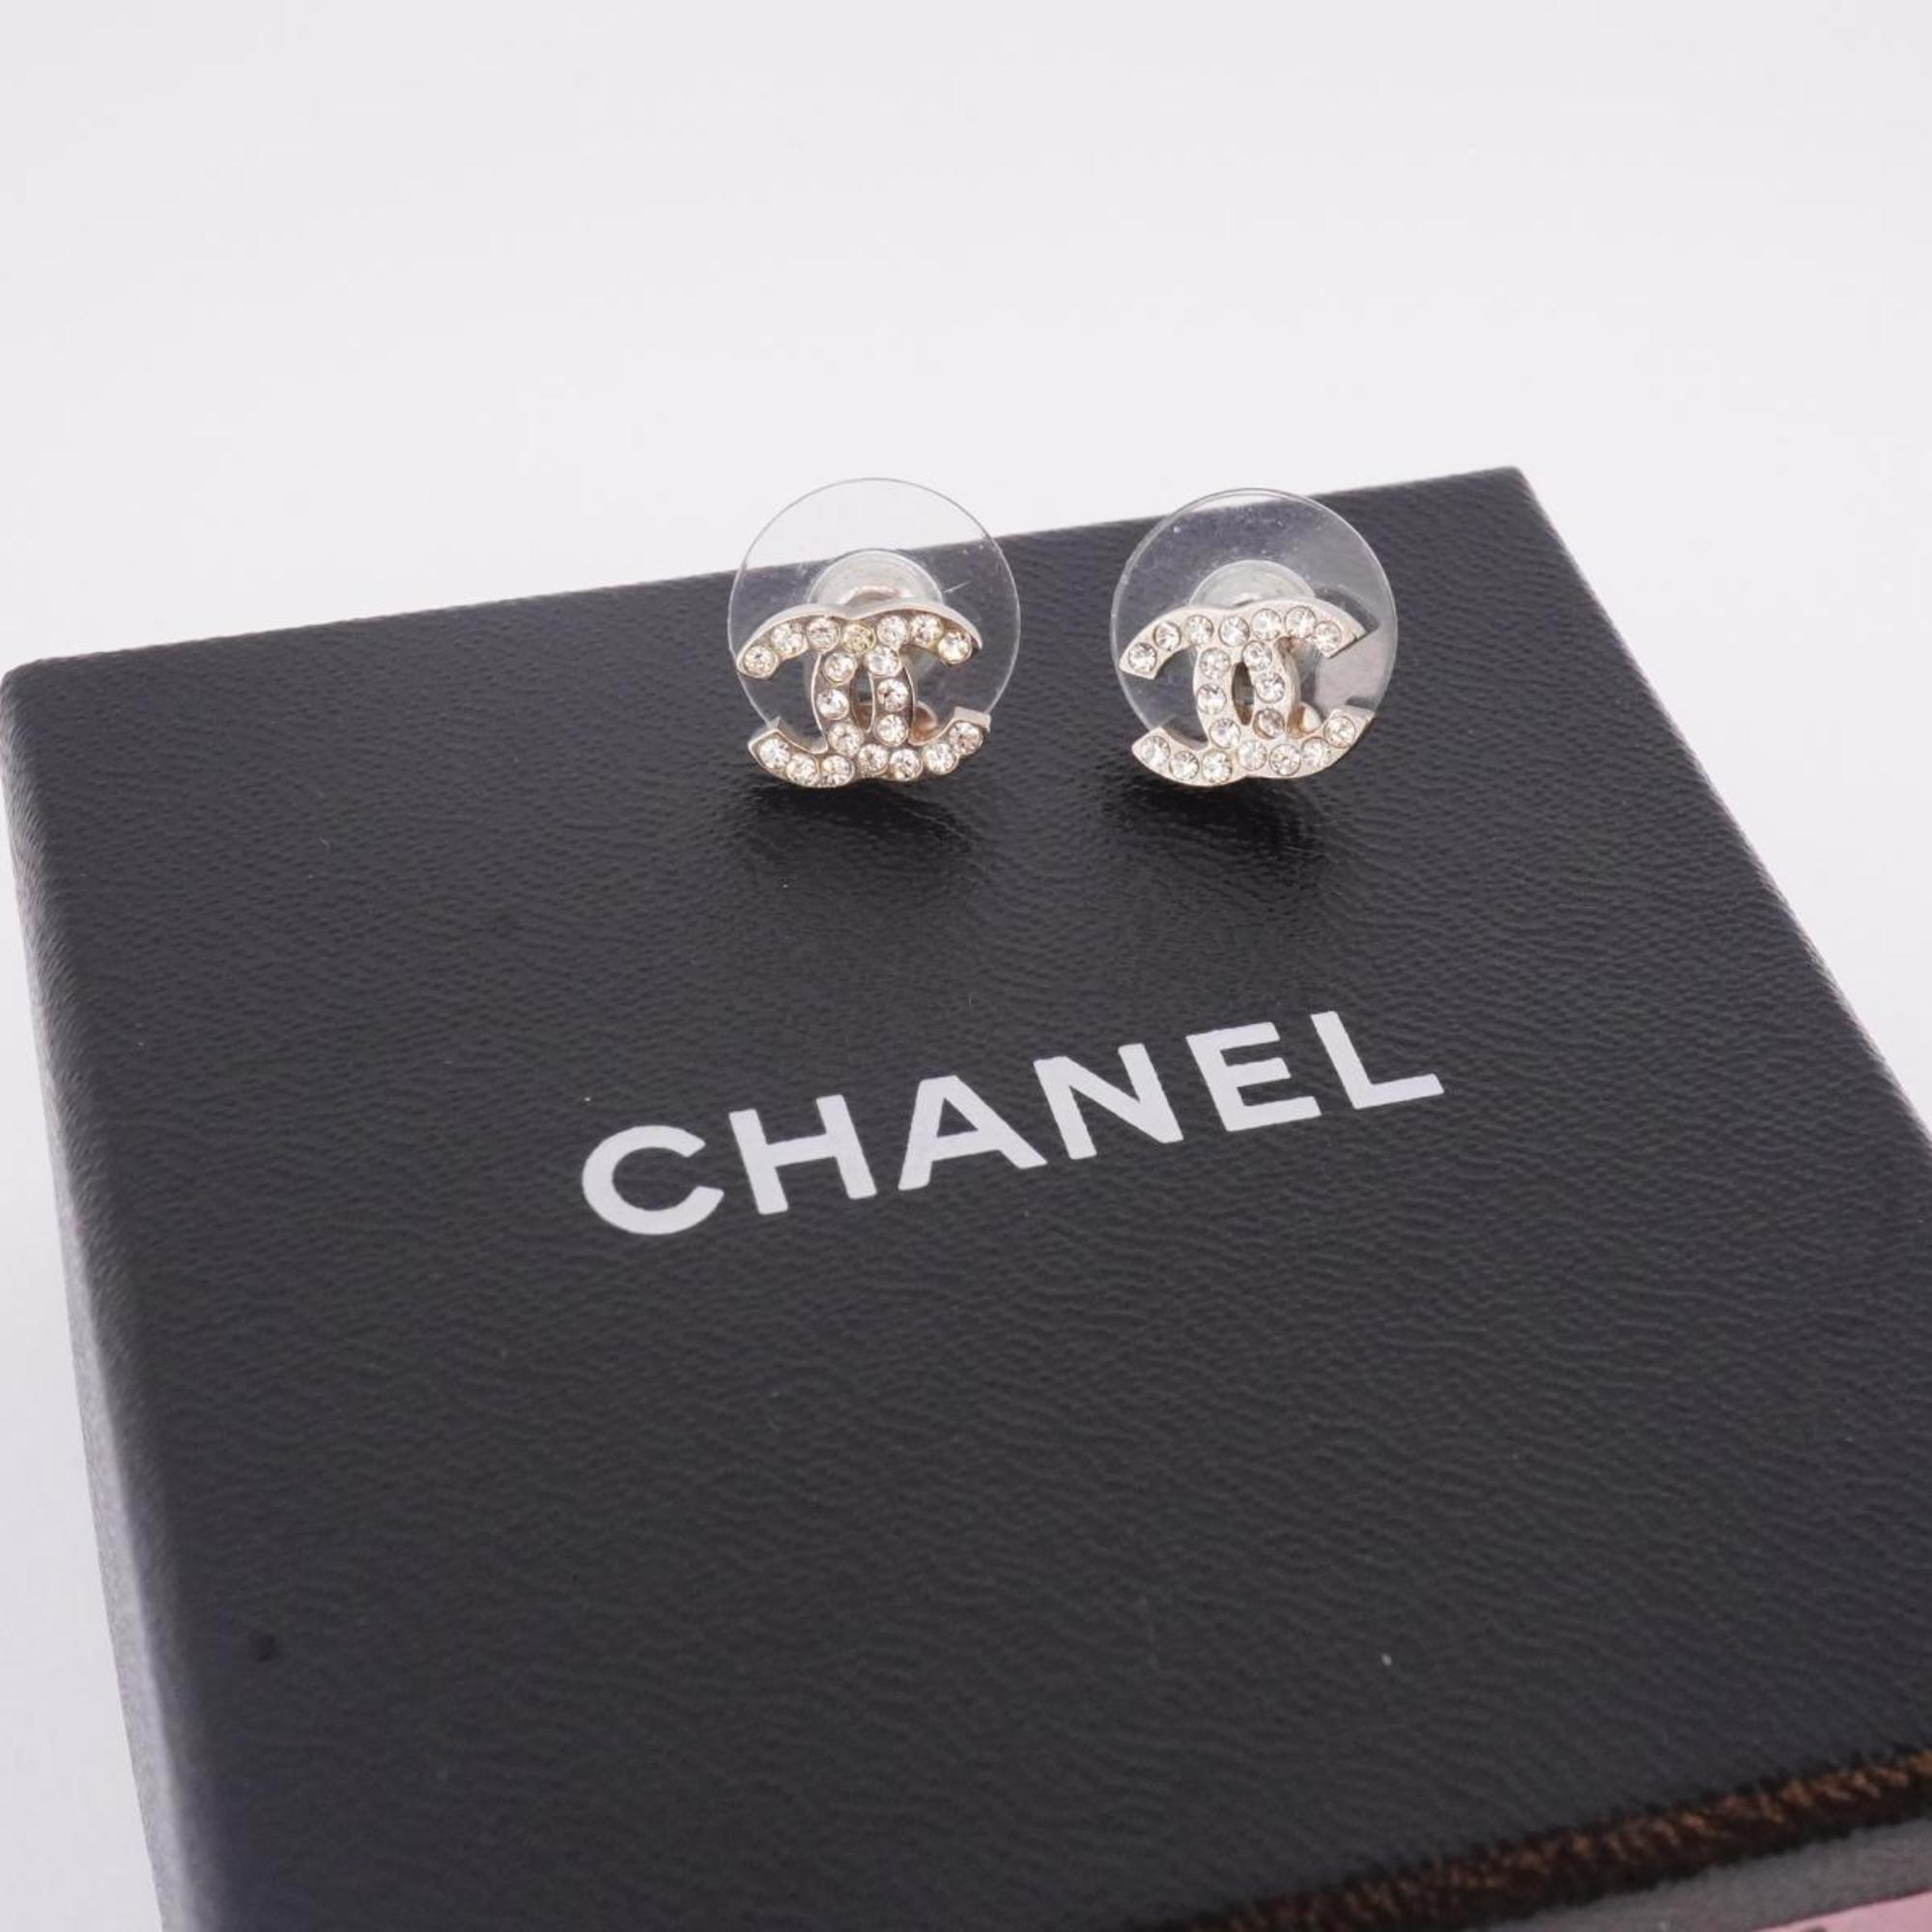 Chanel earrings with Coco mark, rhinestones, metal, silver, 09C, for women